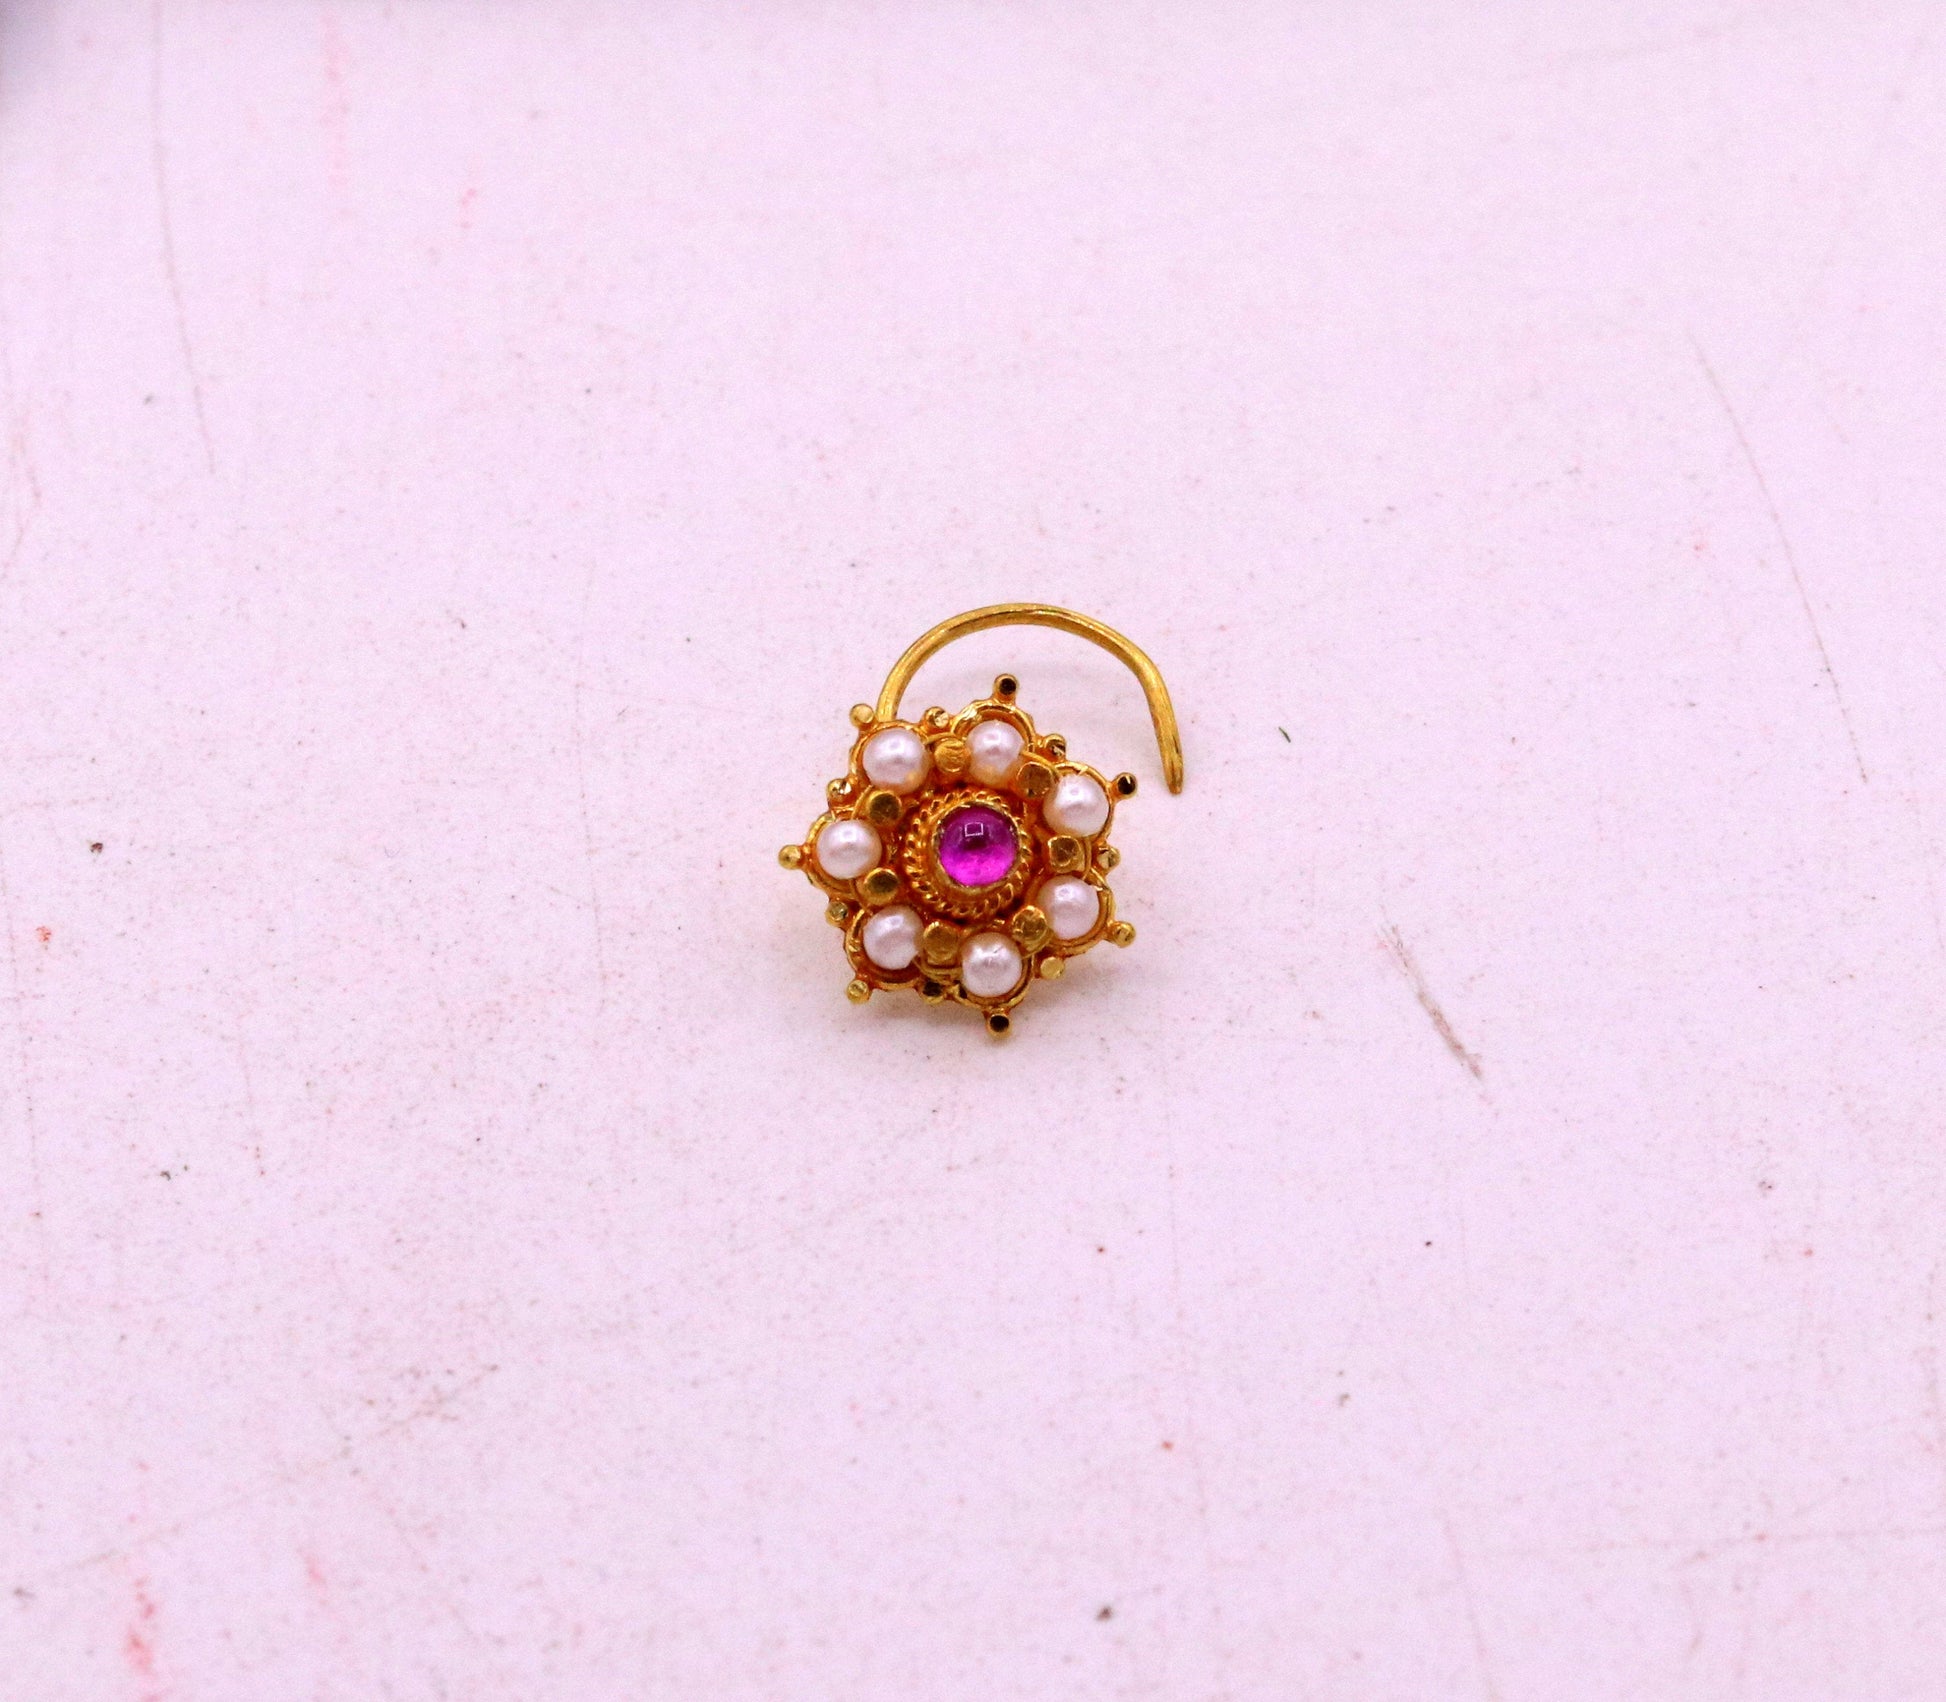 Awesome 6 white pearl and red stone 20kt yellow gold nose pin nose stud Indian vintage antique design handmade tribal jewelry gnp26 - TRIBAL ORNAMENTS